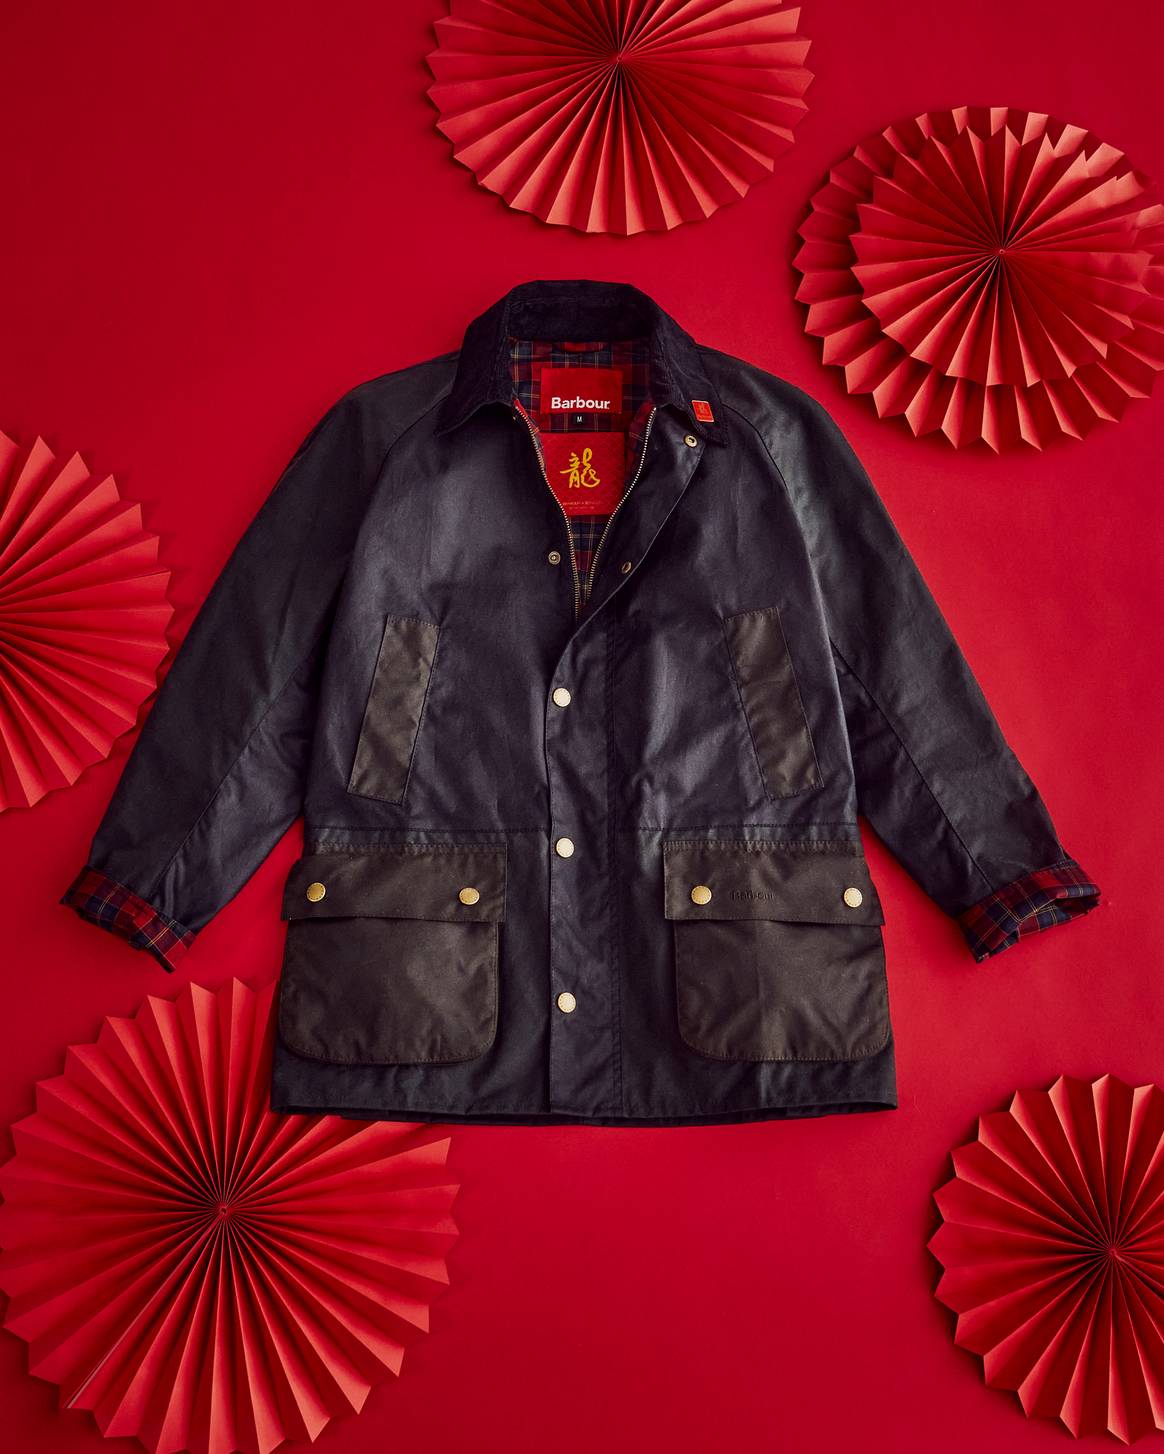 Barbour Lunar New Year collection.